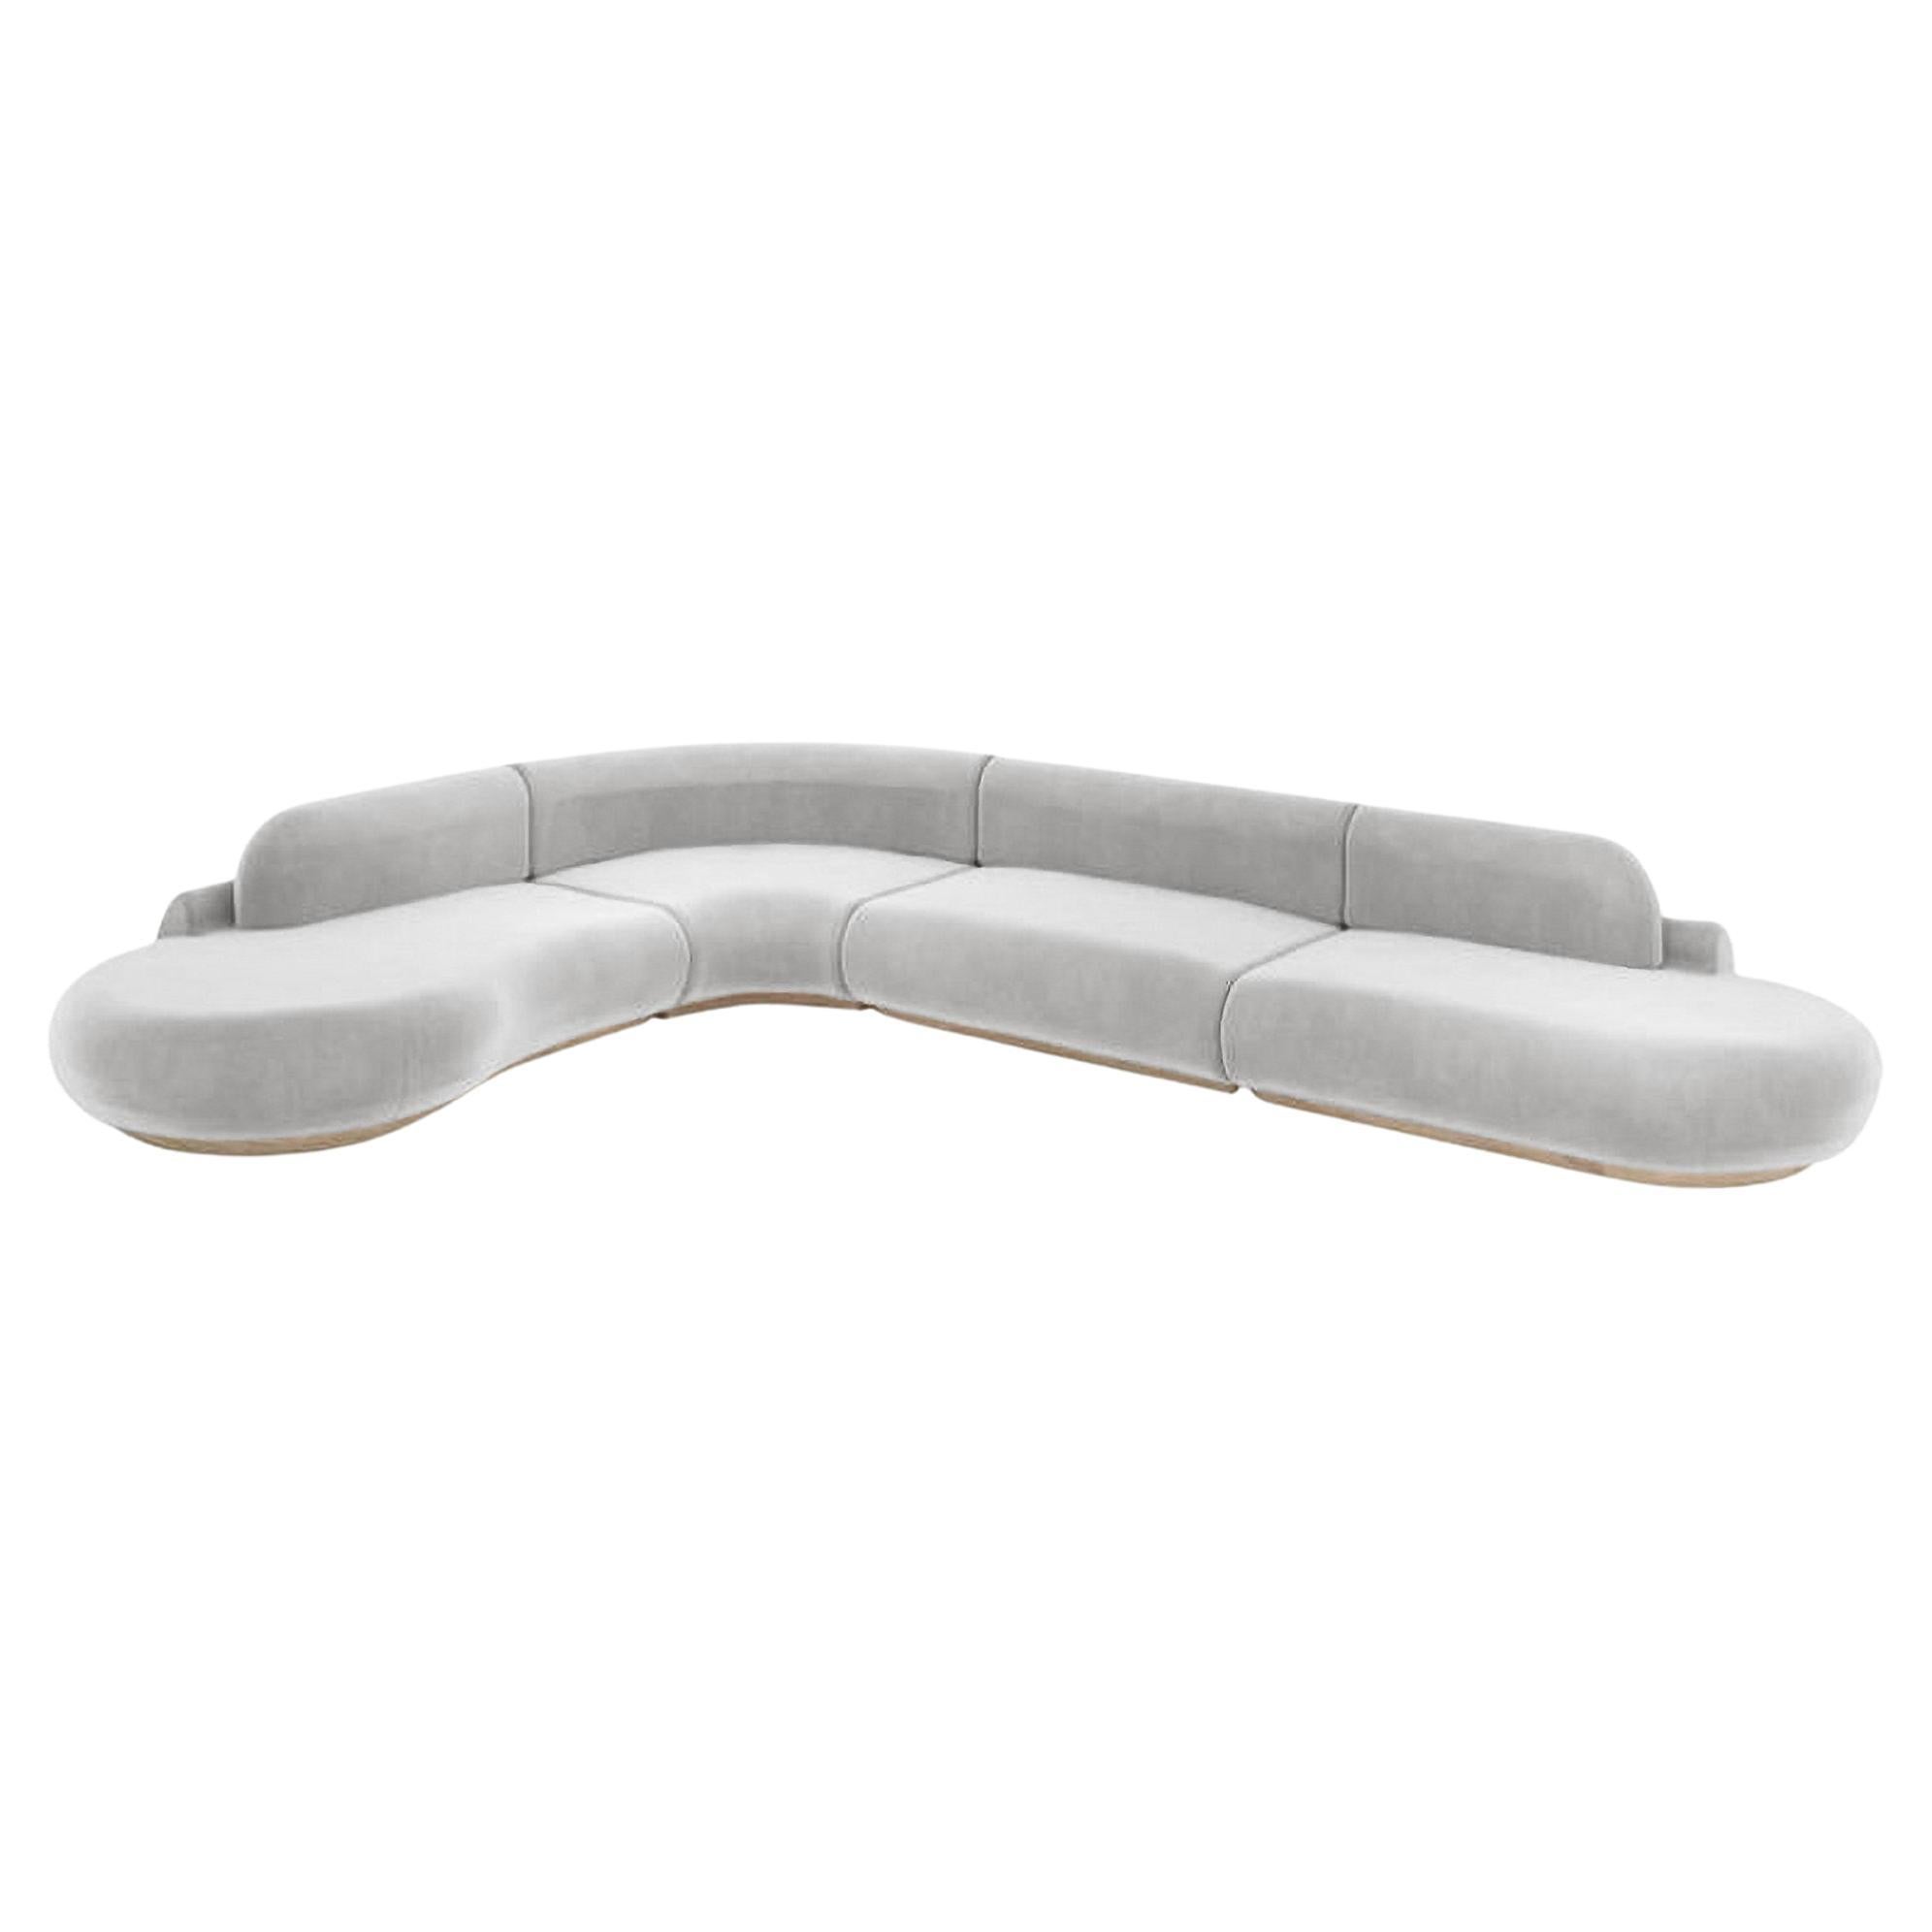 Naked Curved Sectional Sofa, 4 Piece with Natural Oak and Aluminium For Sale